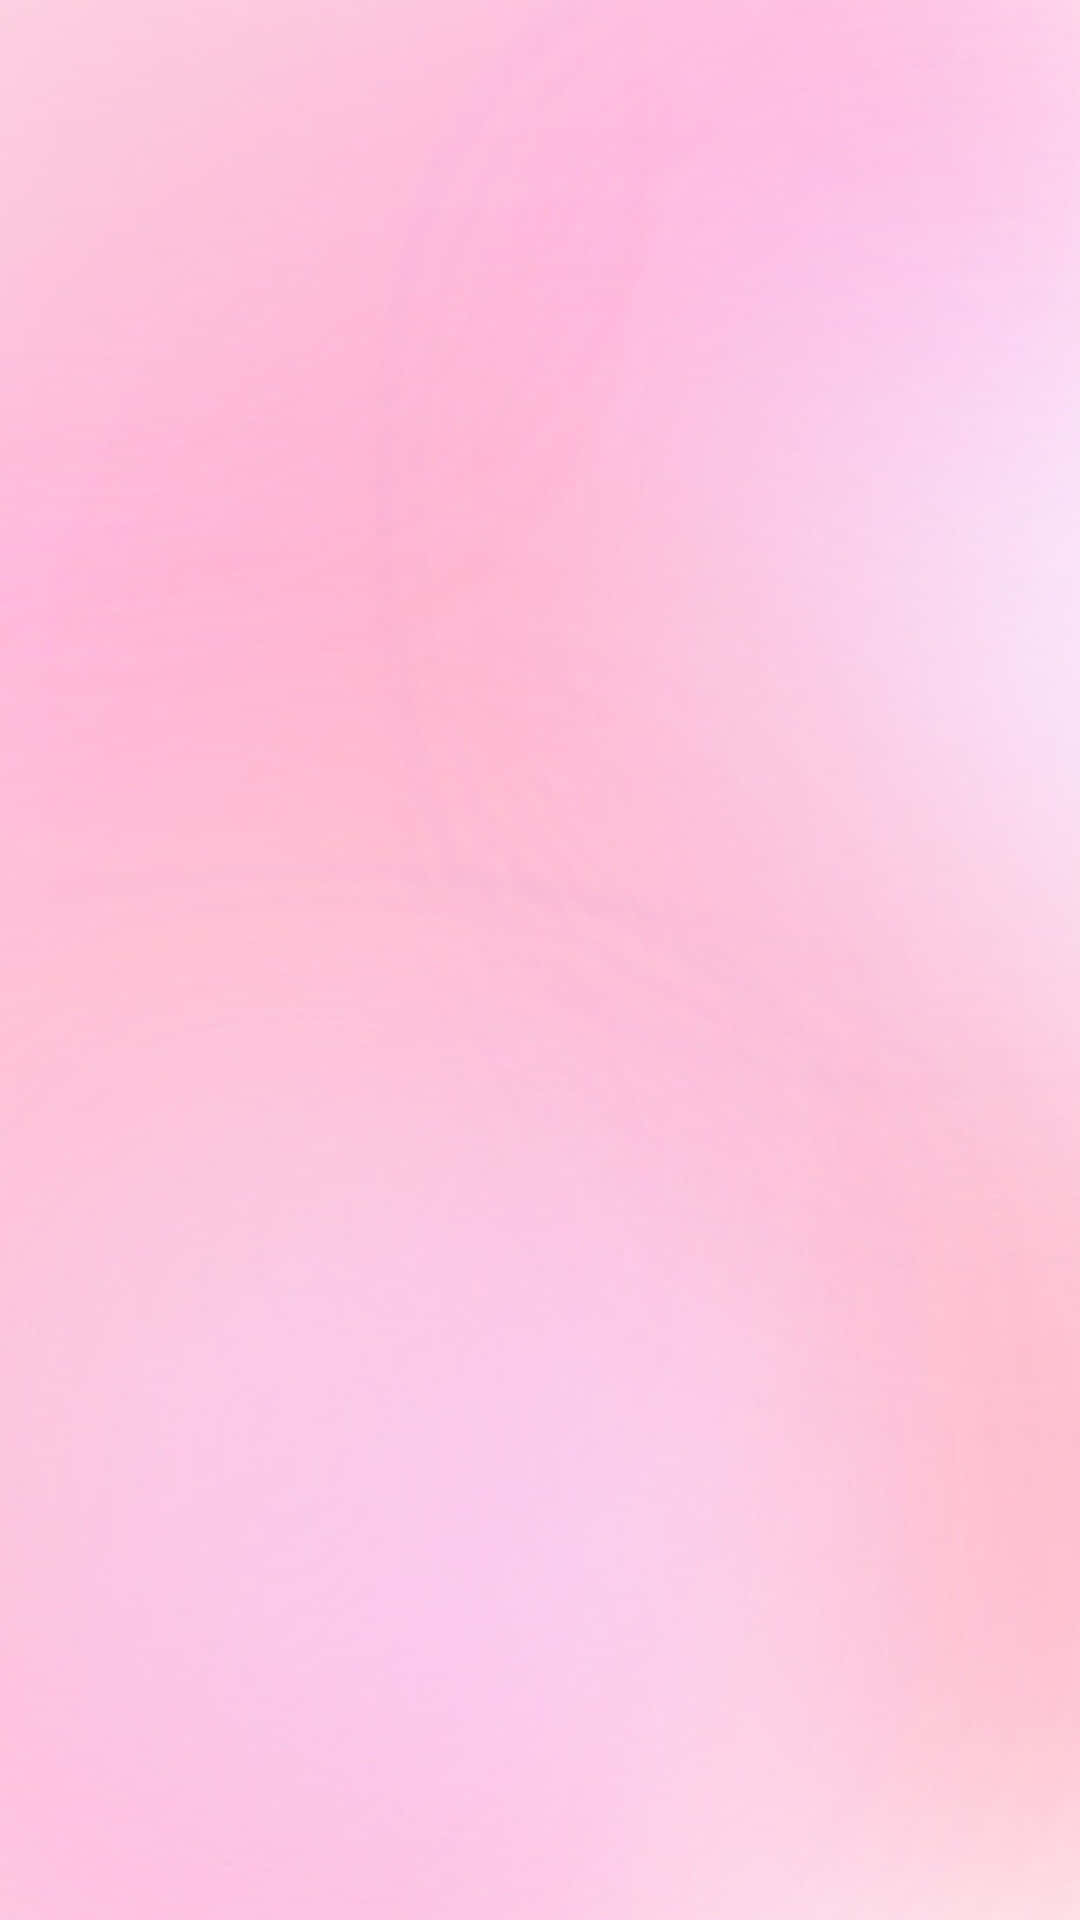 A Pink And White Abstract Background Wallpaper